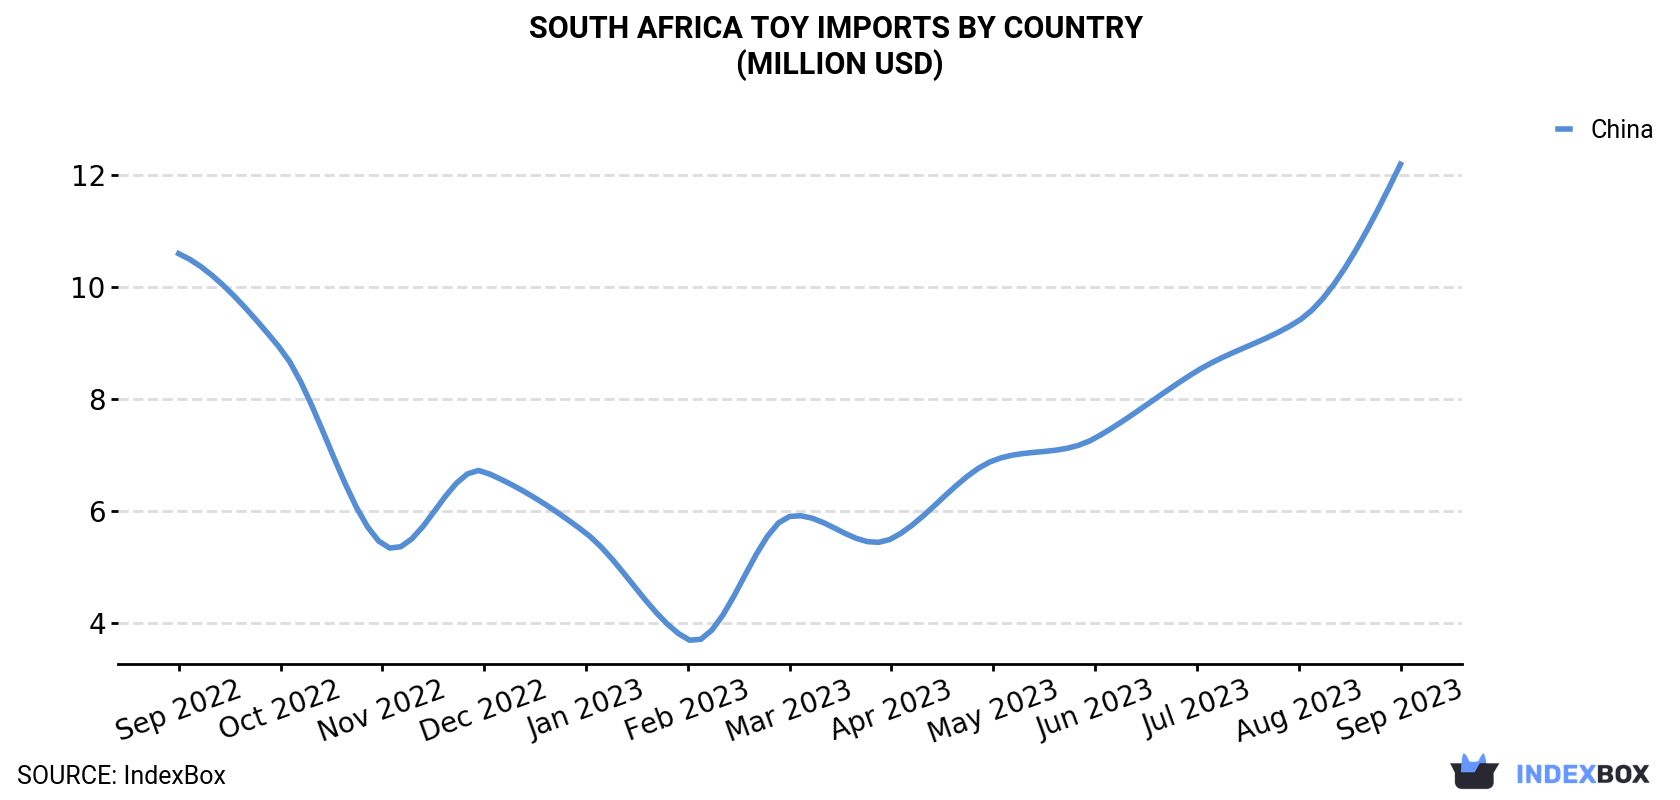 South Africa Toy Imports By Country (Million USD)